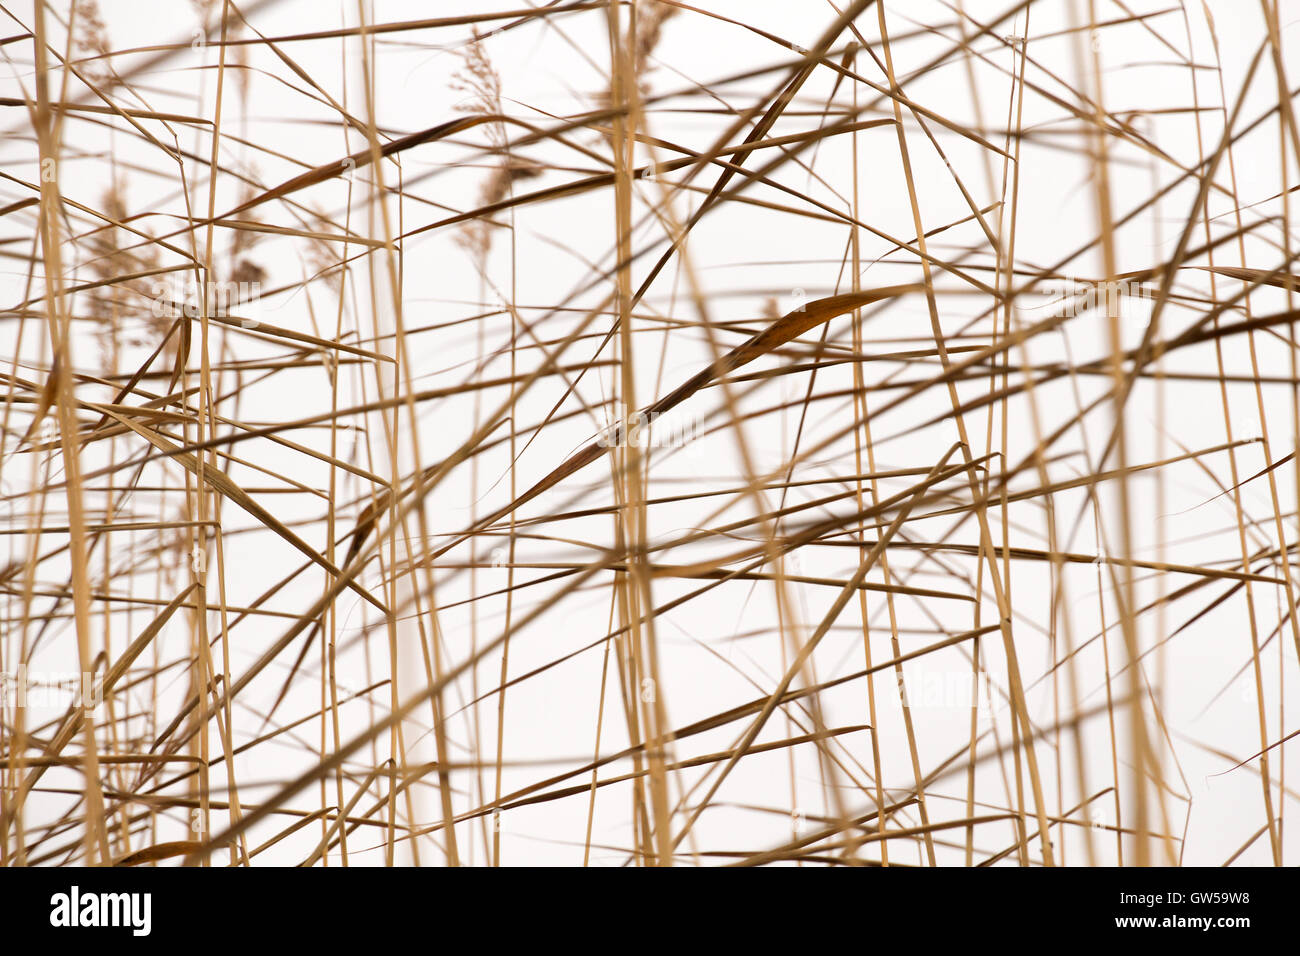 Abstract seasonal autumn nature background: dry plant / reed / reeds bush closeup forming a geometric pattern Stock Photo